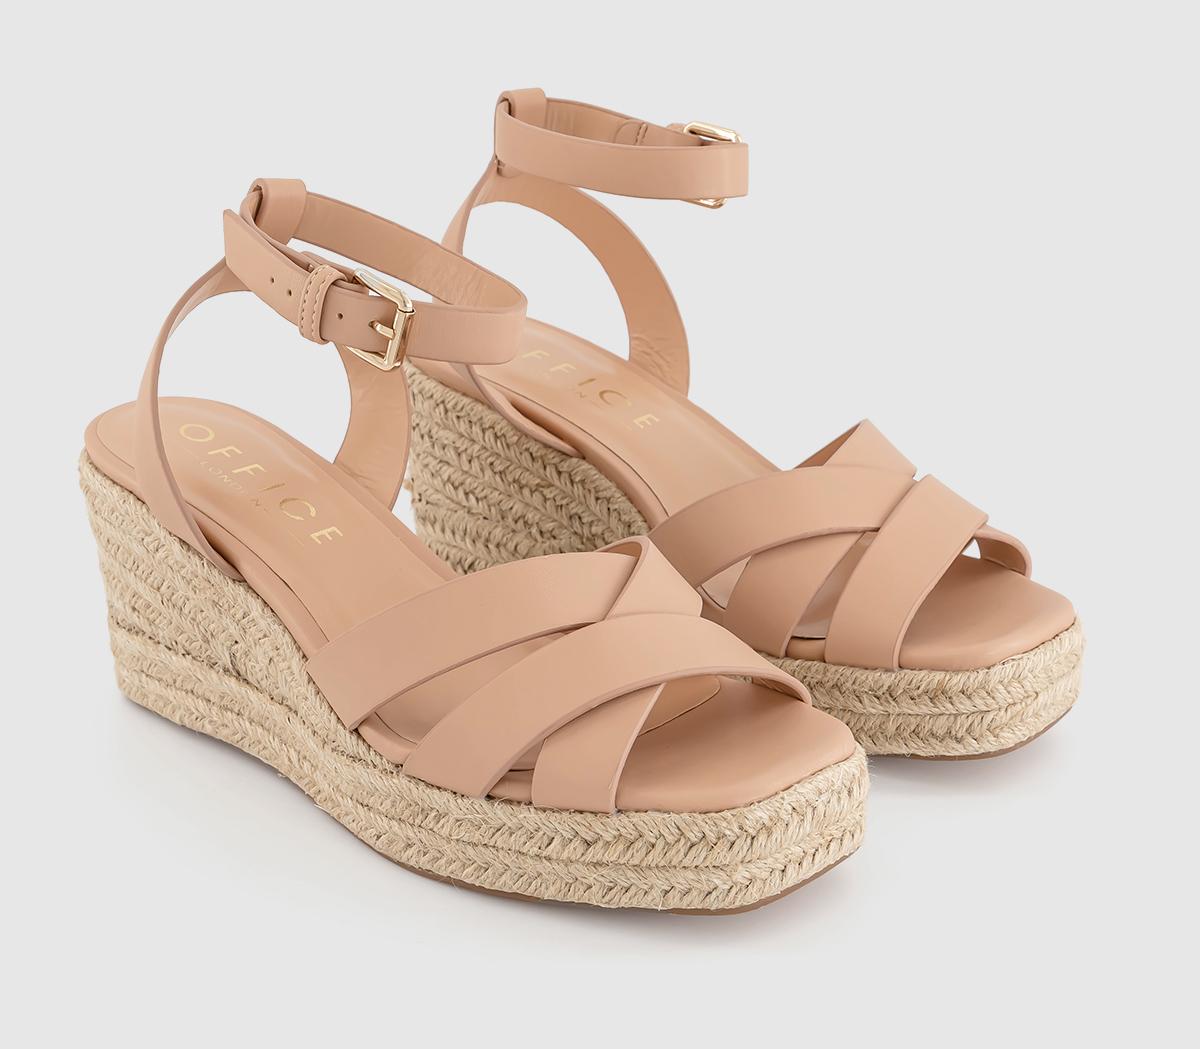 OFFICE Womens Martina Multi Strap Mid Espadrille Wedges Blush Pink, 4